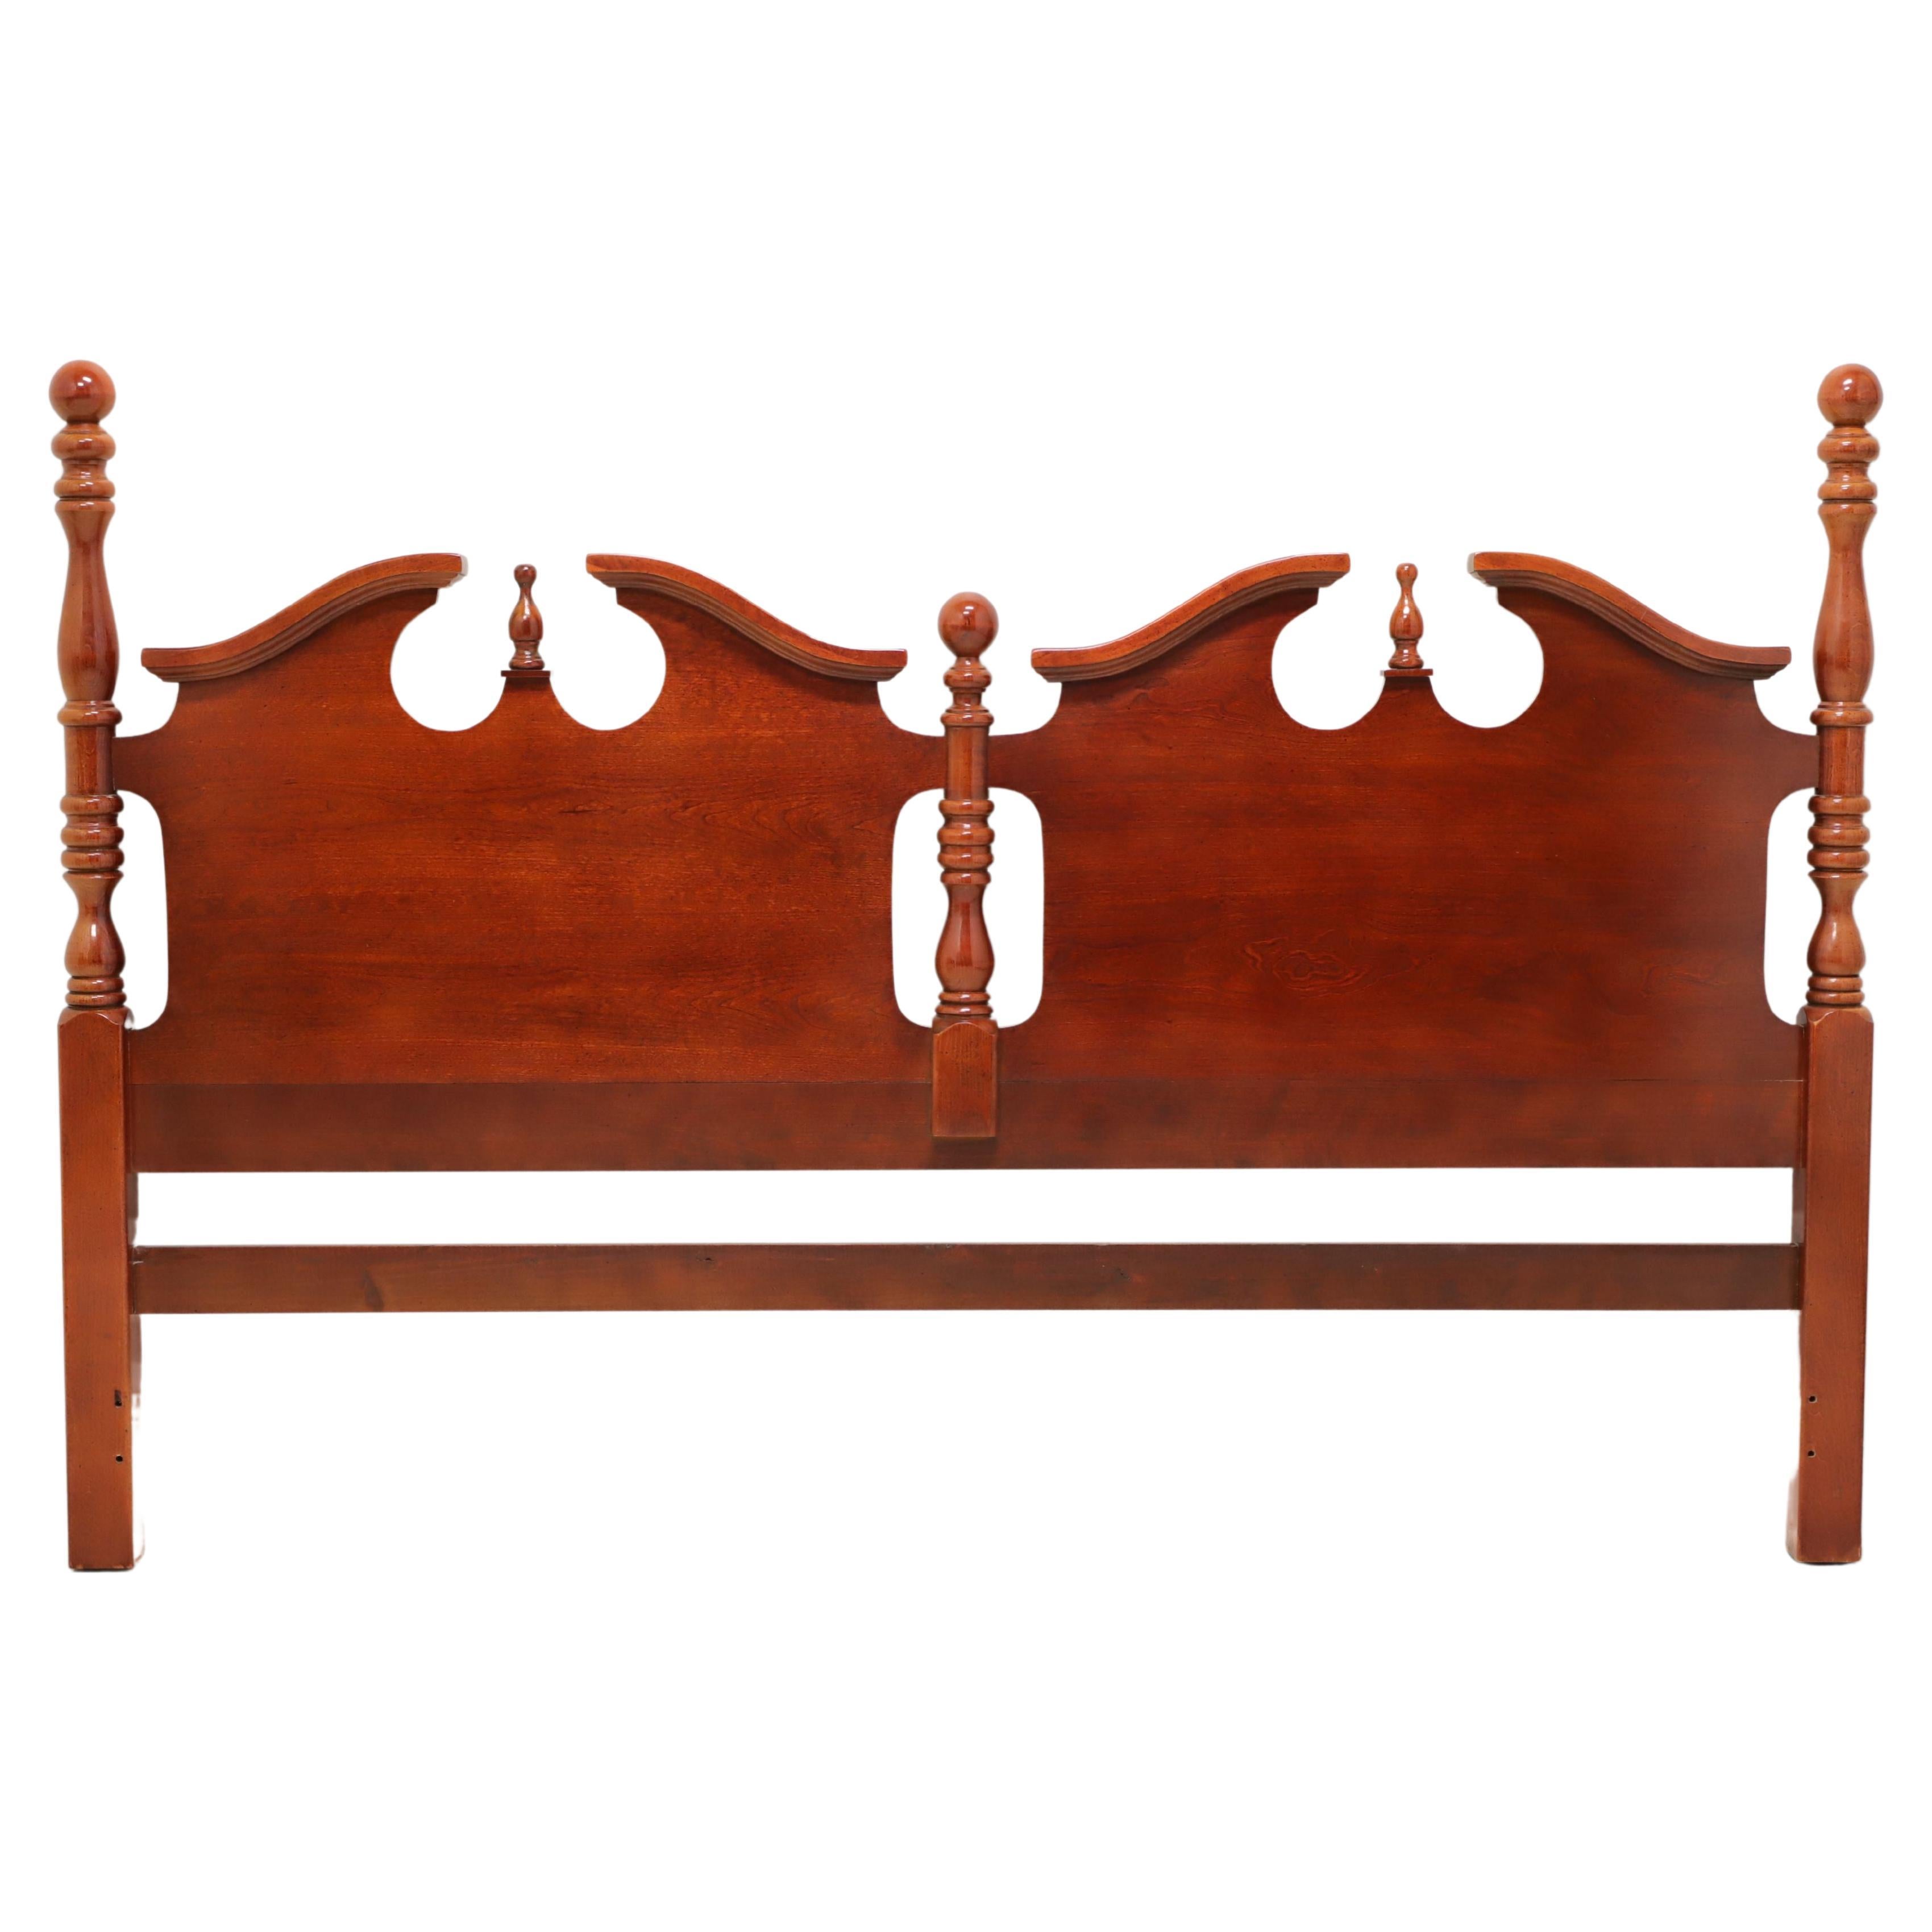 THOMASVILLE Cherry Traditional Double Pediment King Size Headboard For Sale